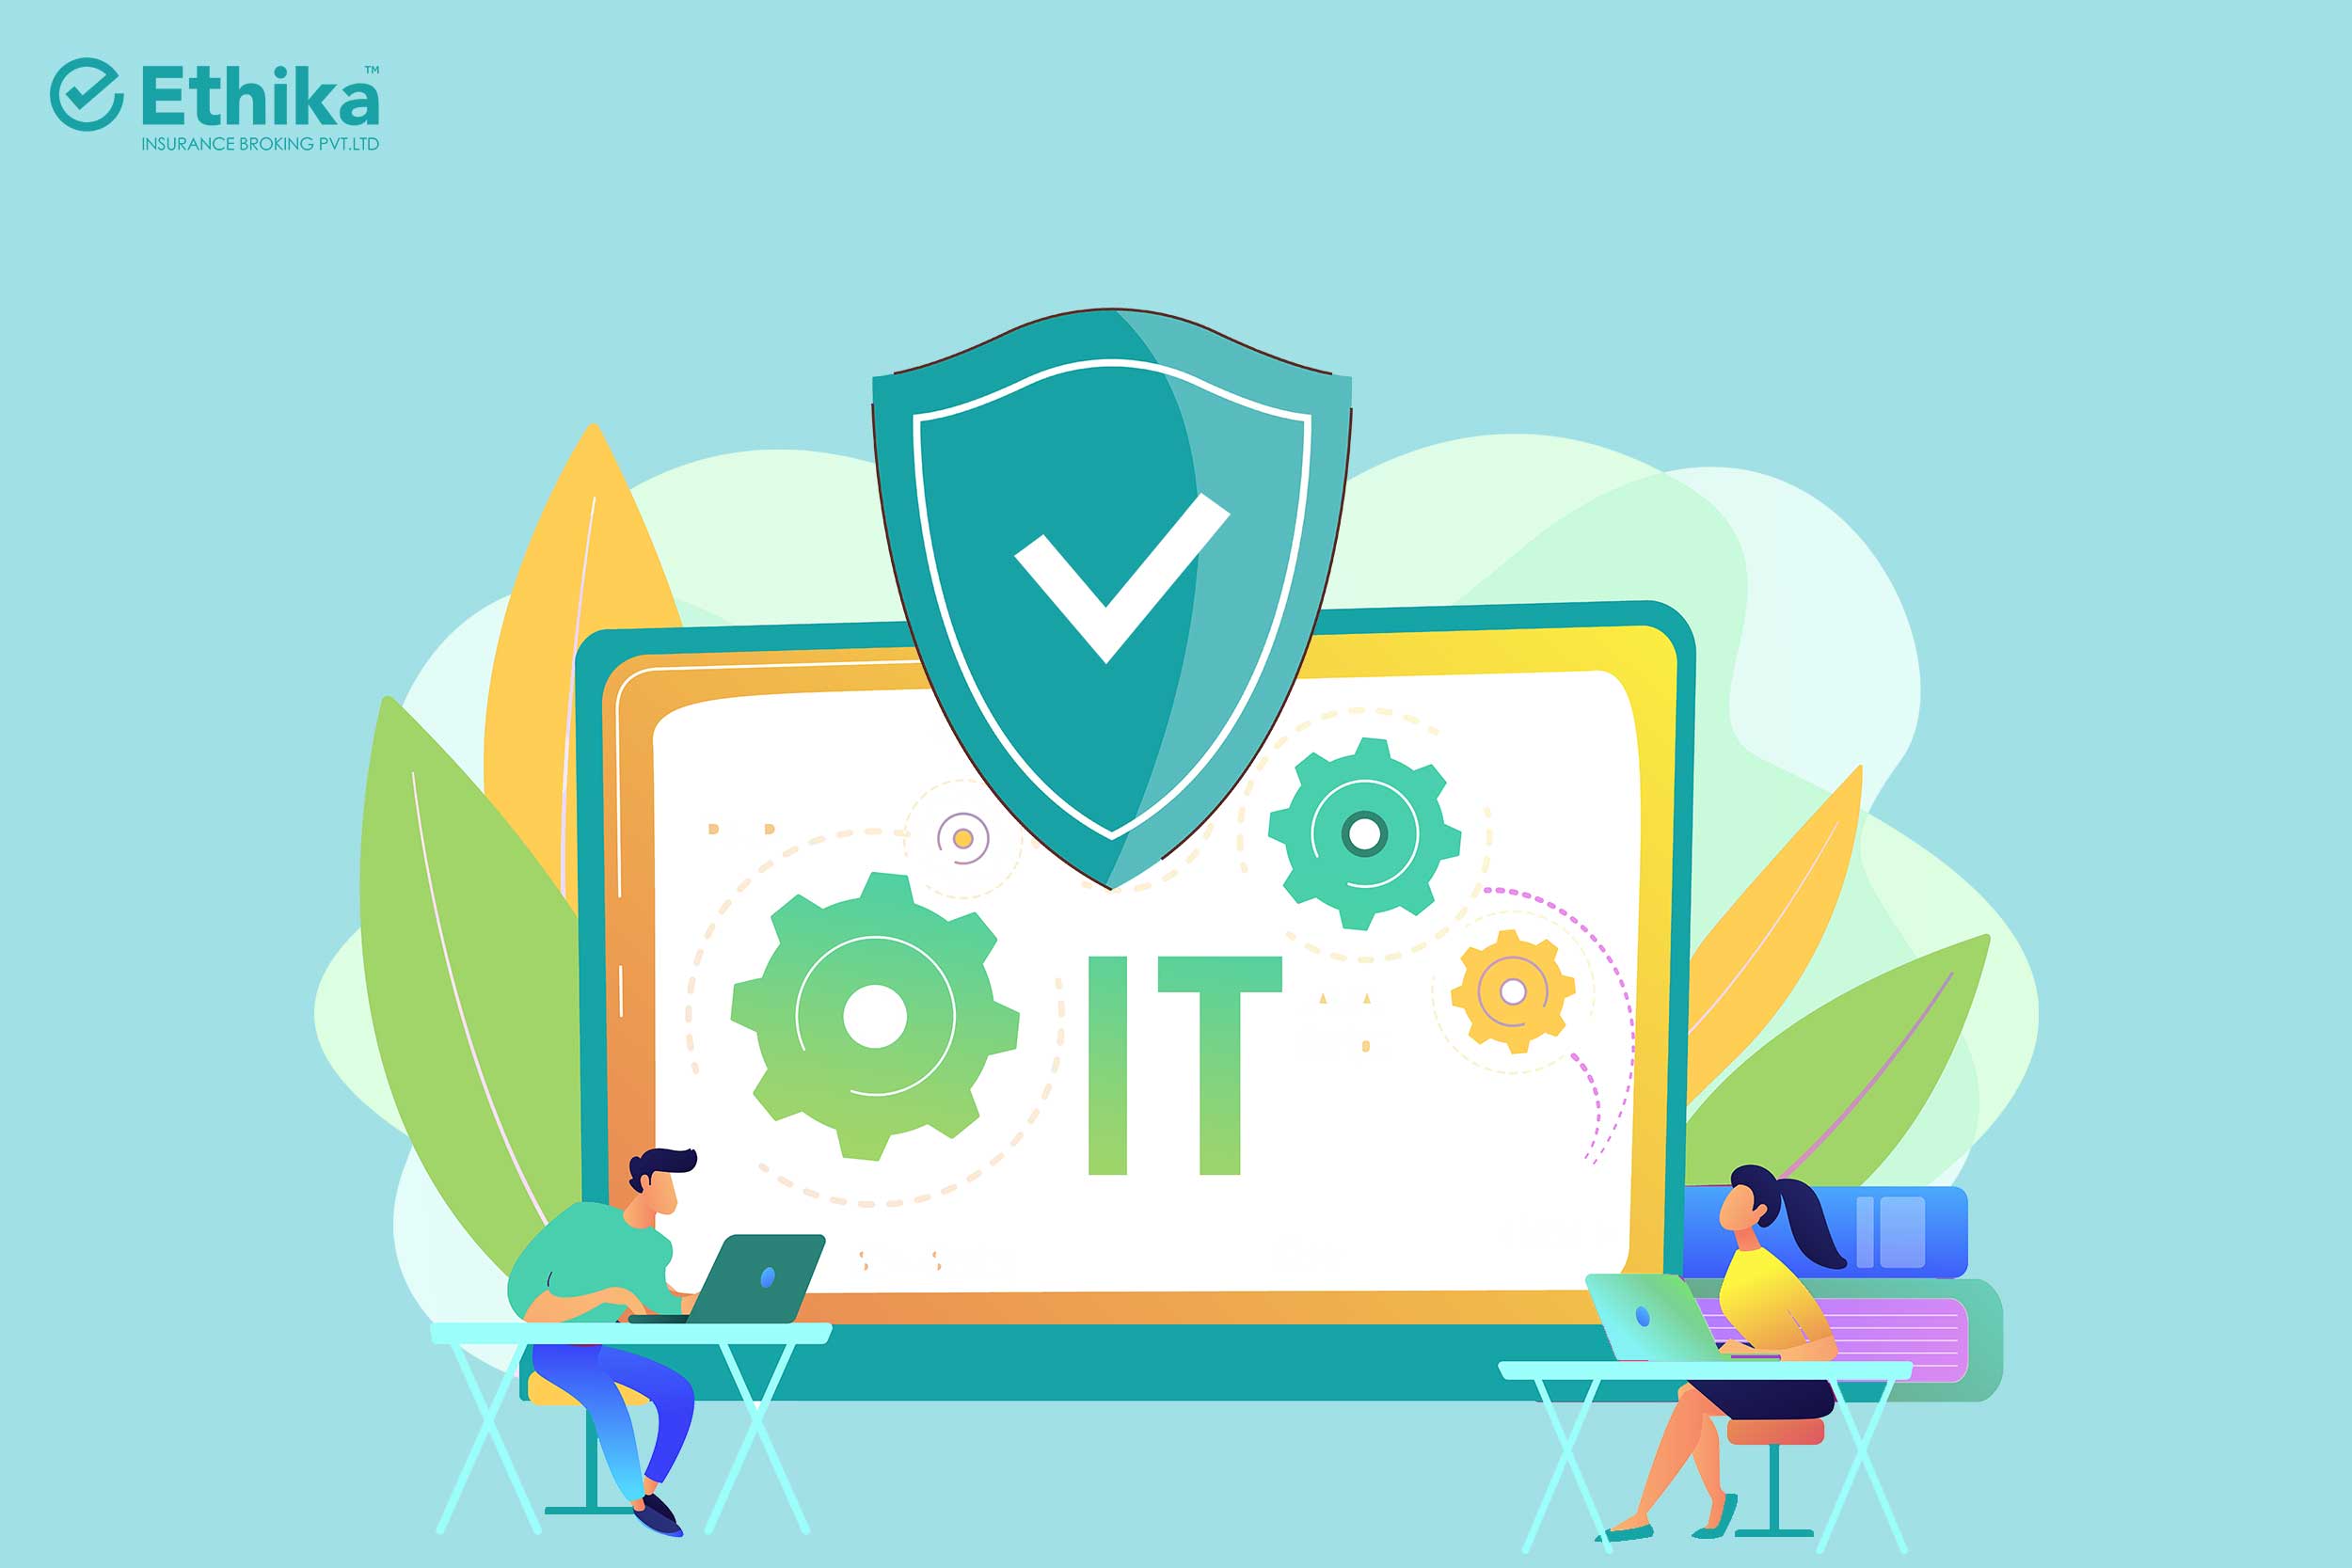 Vector Image having Tick Mark | Group Health Insurance for an IT Services Company